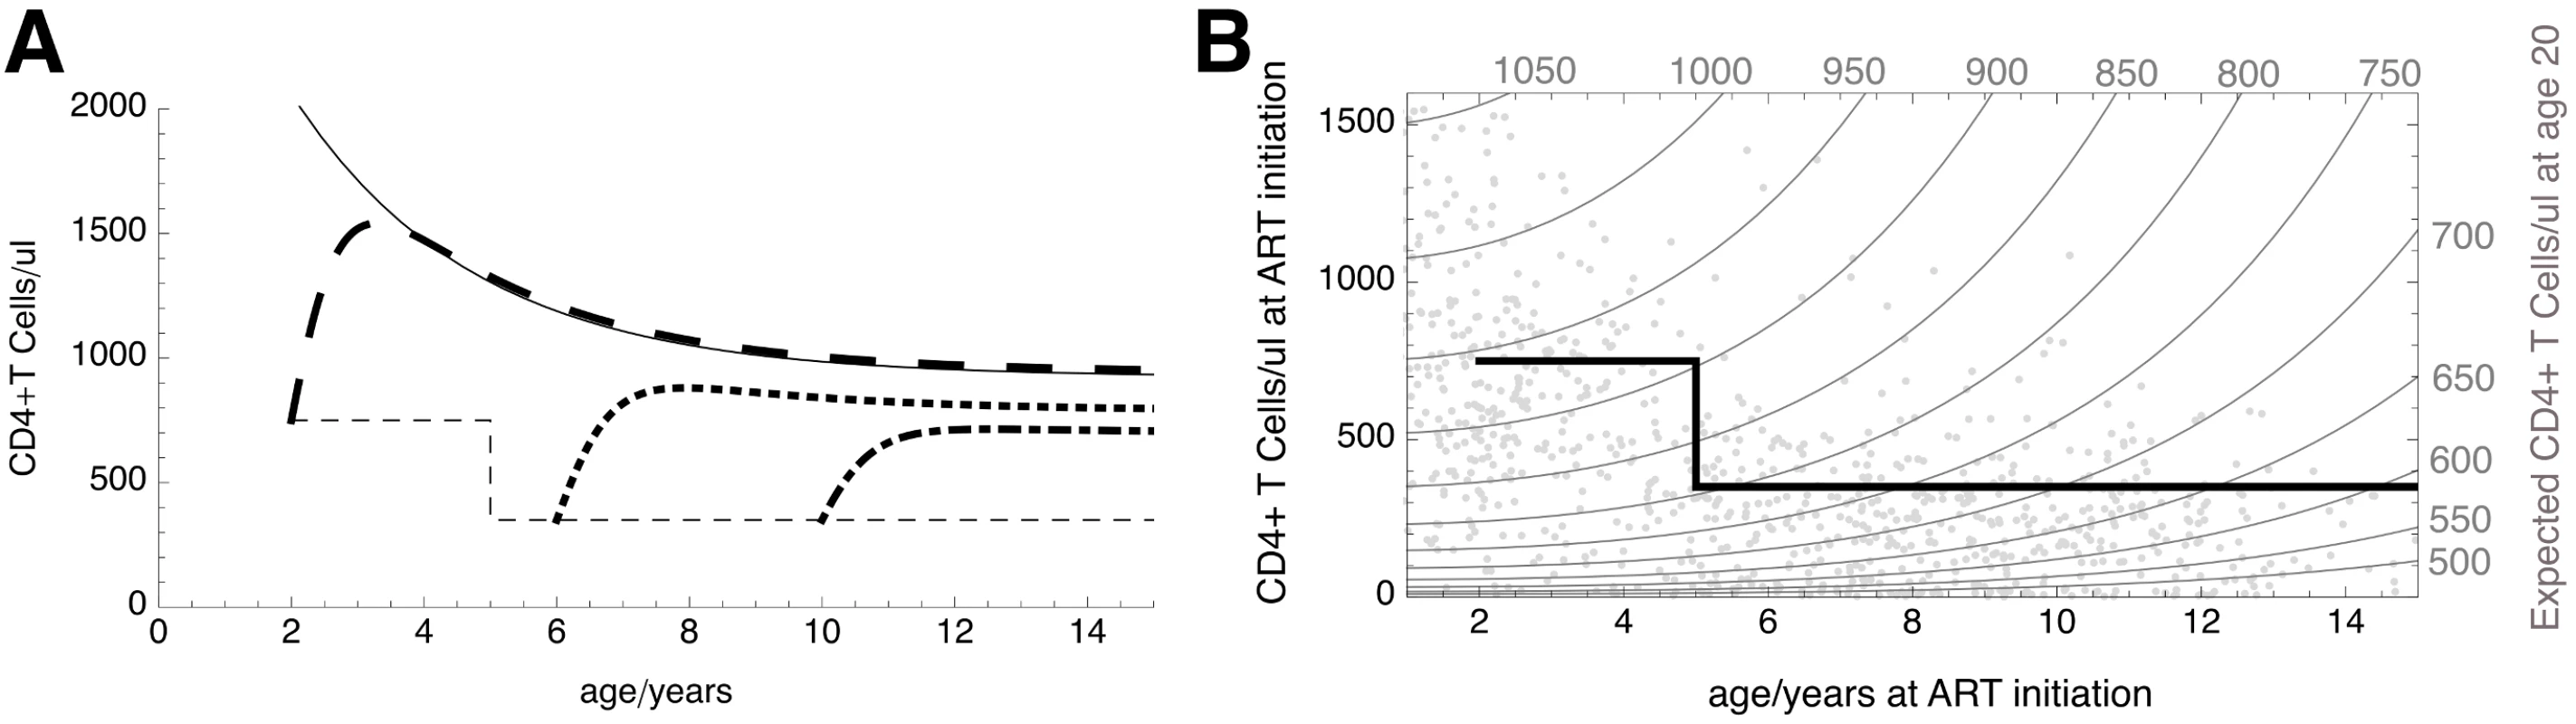 Predicted long-term CD4 counts in children starting ART at different ages and CD4 levels.